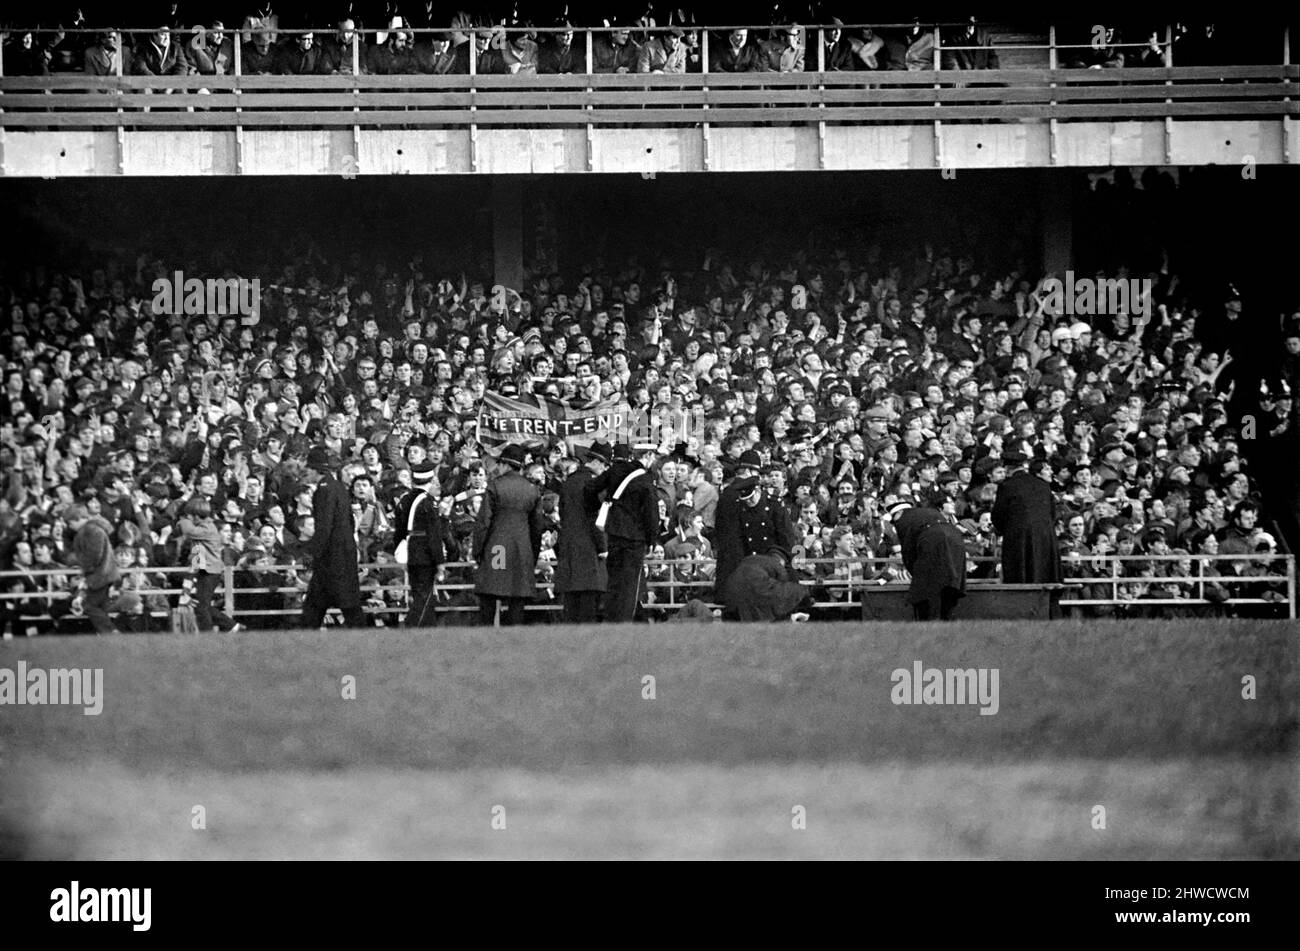 Derby v. Nottingham Forest. Action from the match. December 1969 Z11534-006 Stock Photo